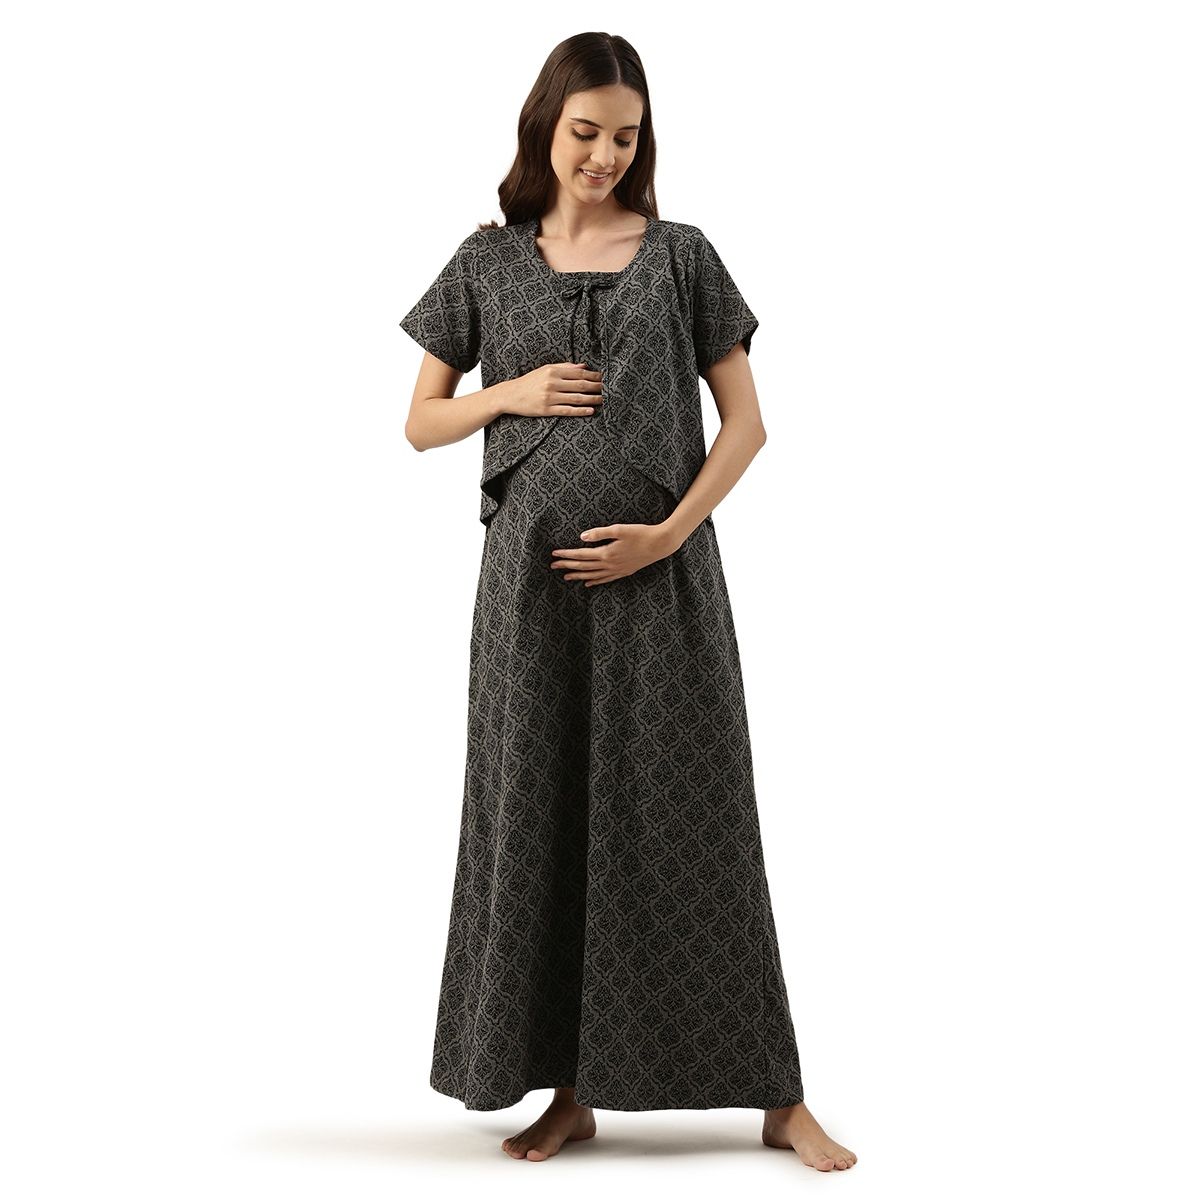 Blue & White Checks Feeding Night Gown With Horizontal Nursing Under The  Flap. By Morph Maternity.